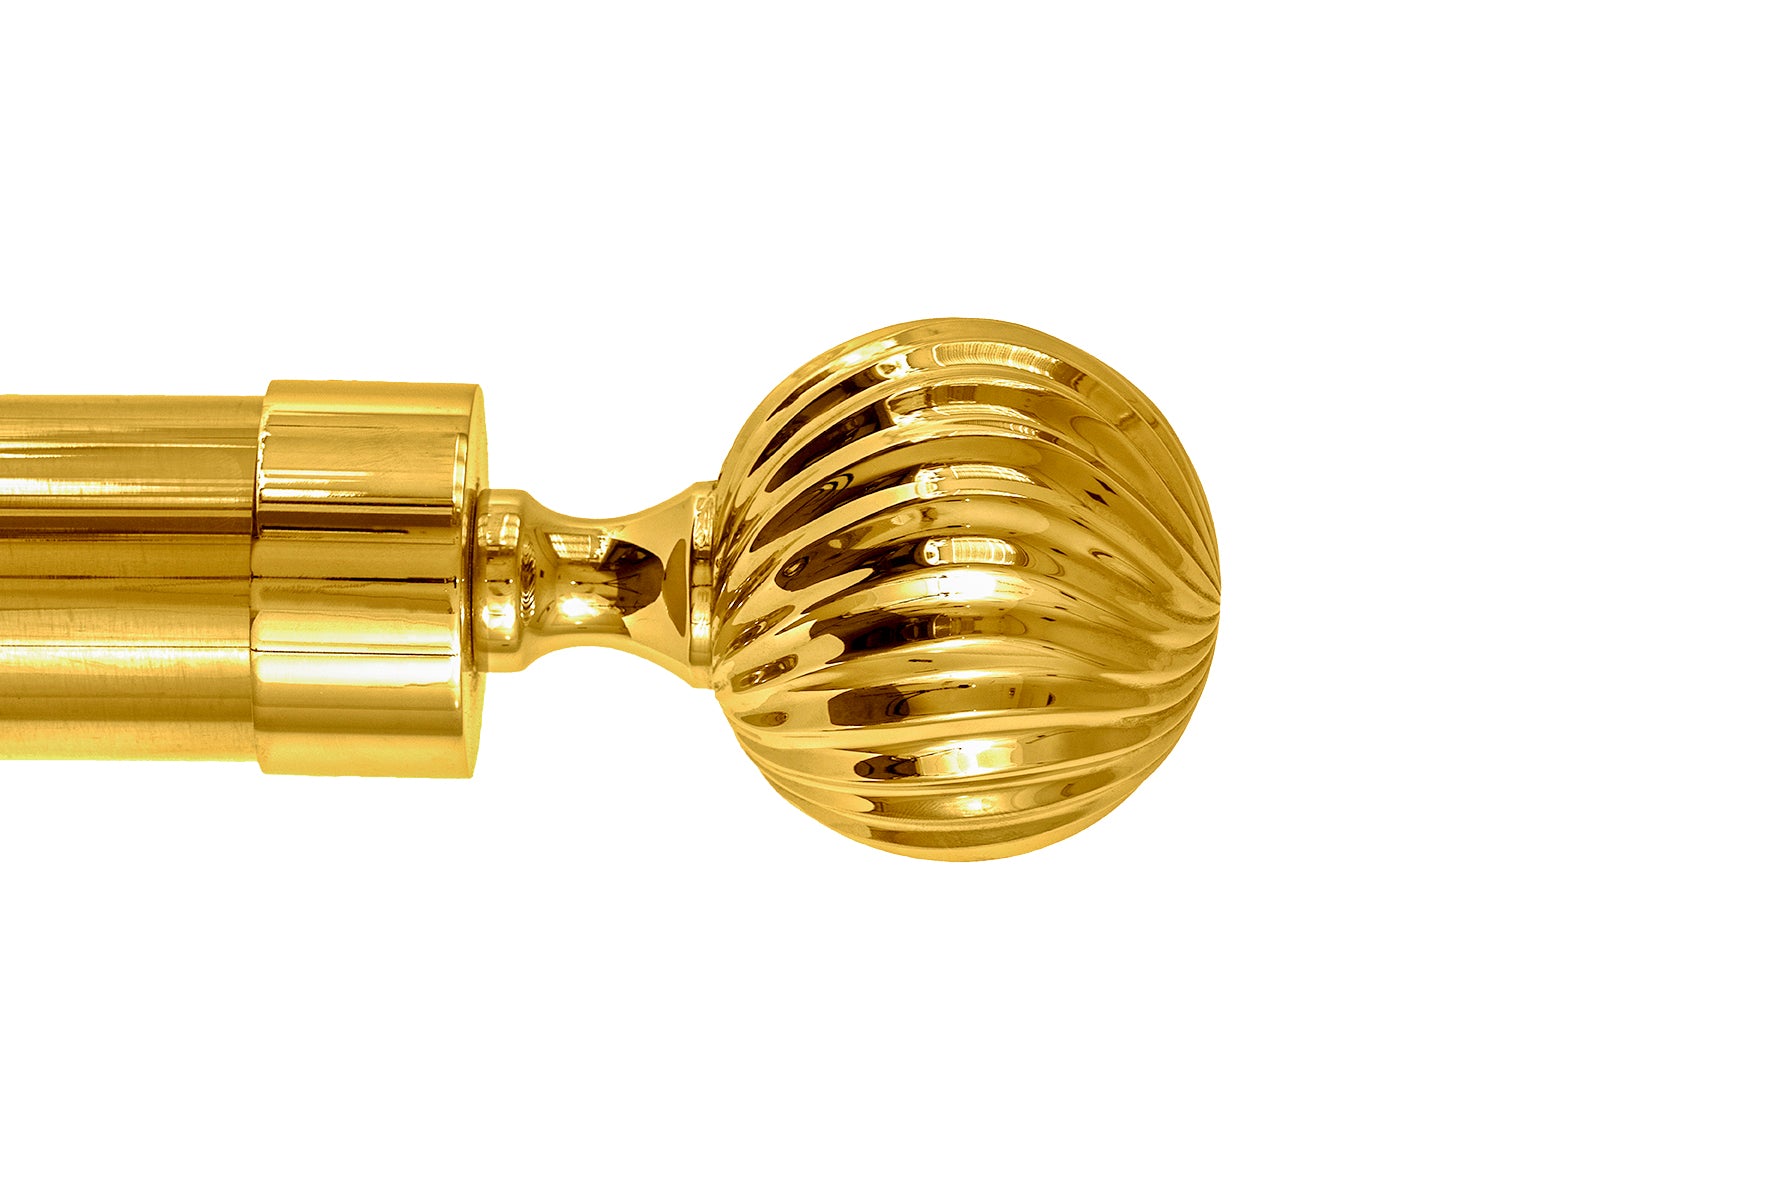 Tillys Classic Twisted Ball Finial Curtain Pole Set in Polished Brass